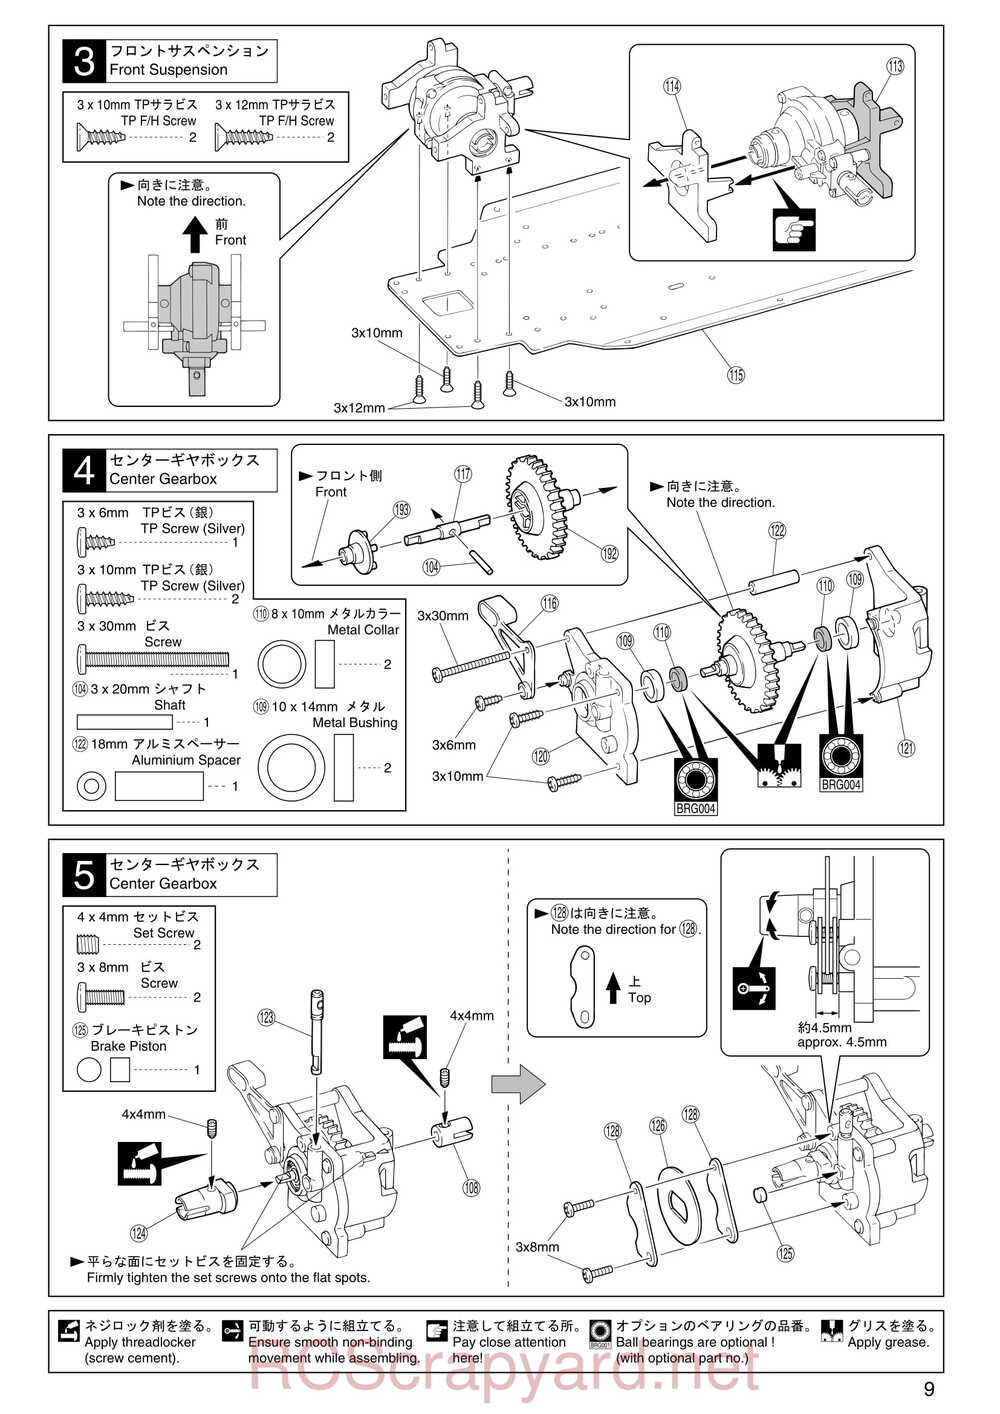 Kyosho - 31213 - TR-15 Monster-Touring - Manual - Page 09